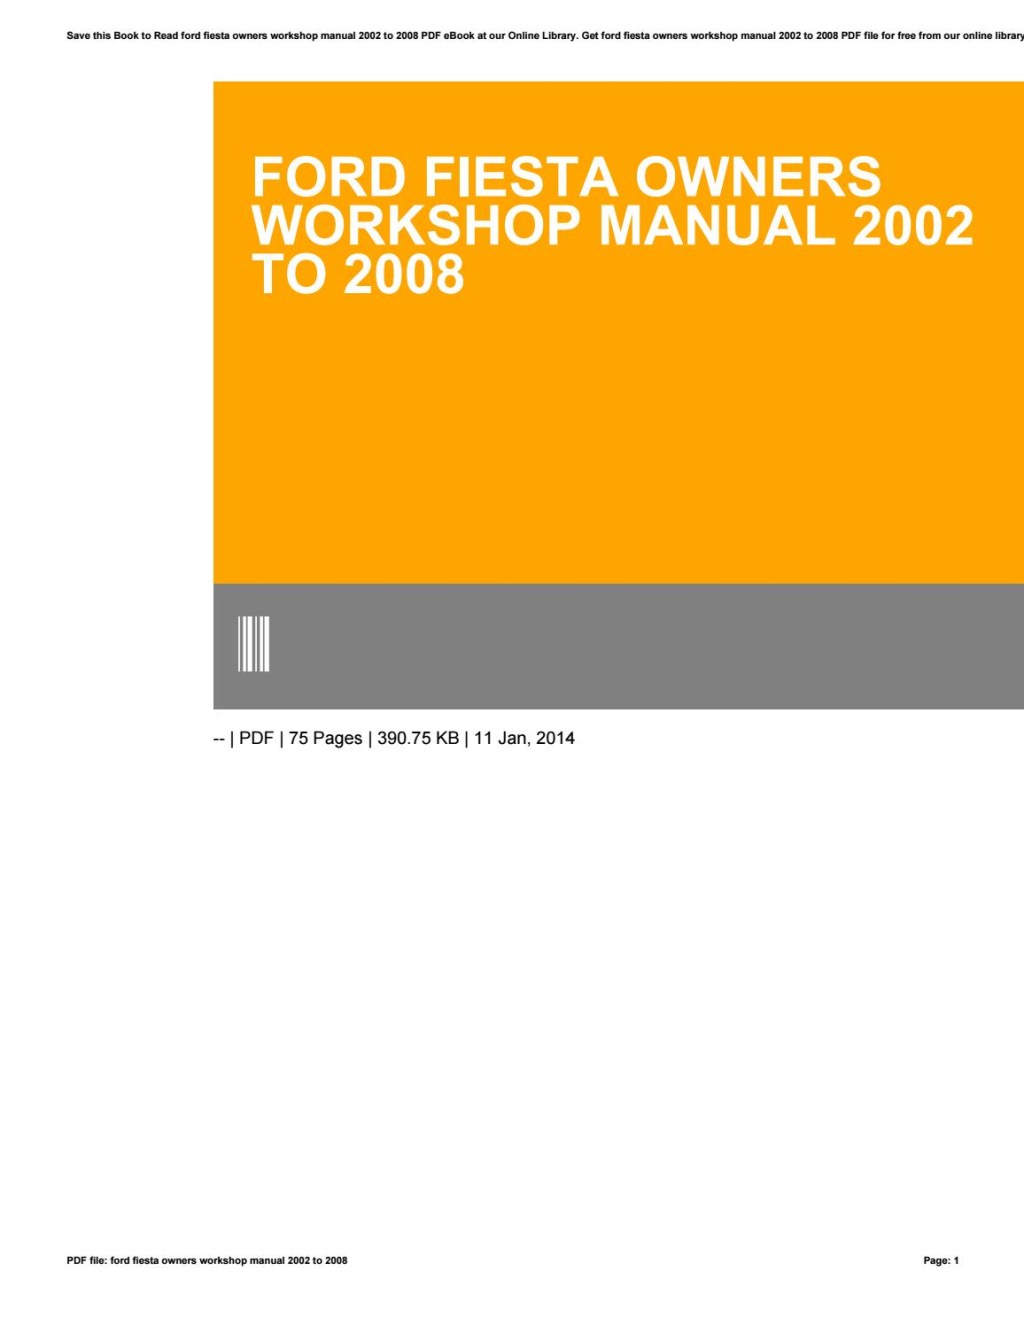 Picture of: Ford Fiesta Owners Workshop Manual  To  by normabarwick